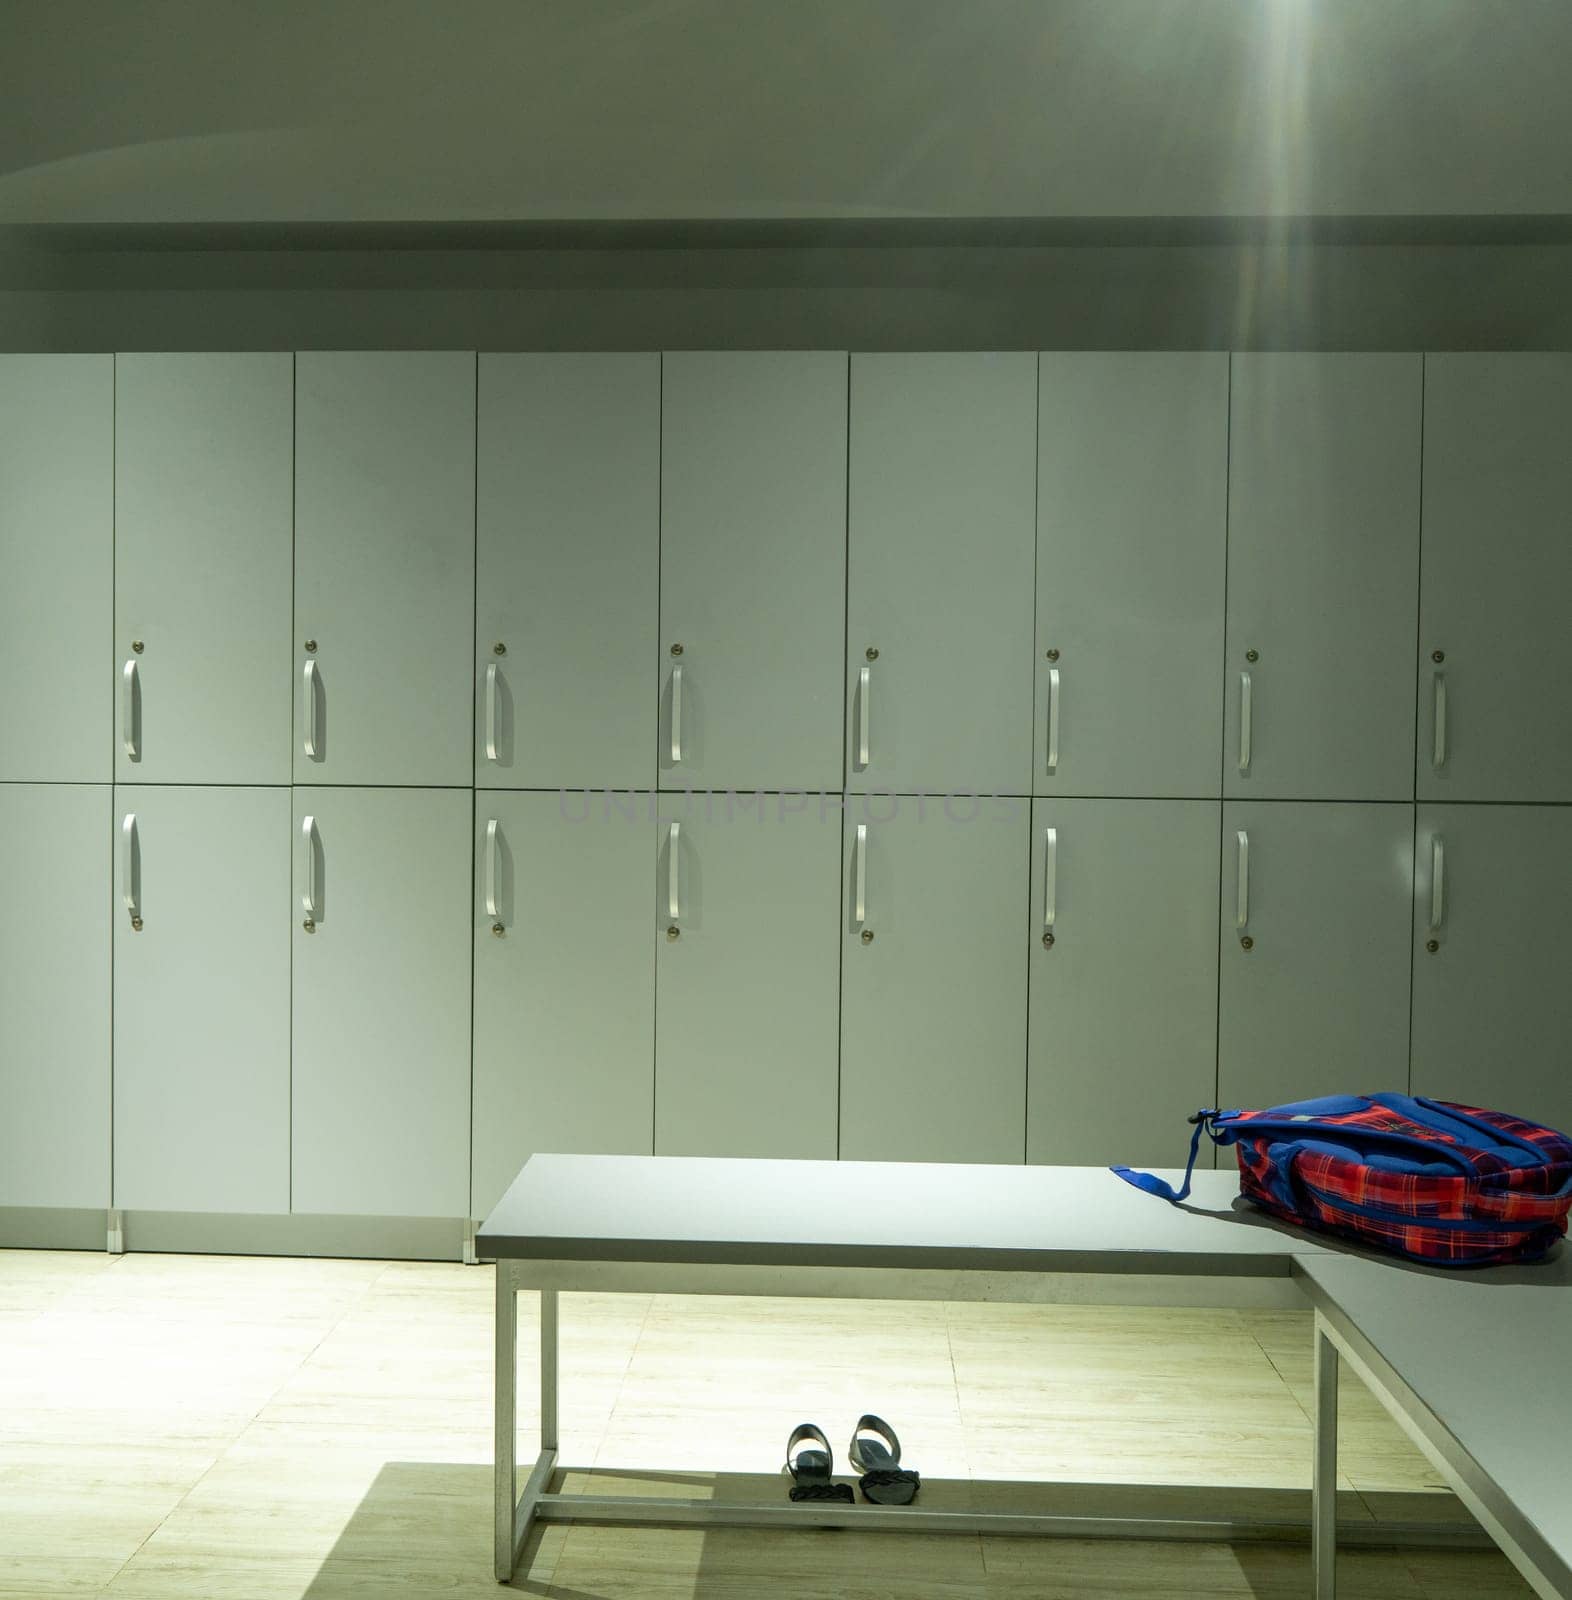 The locker room in the sports complex by A_Karim